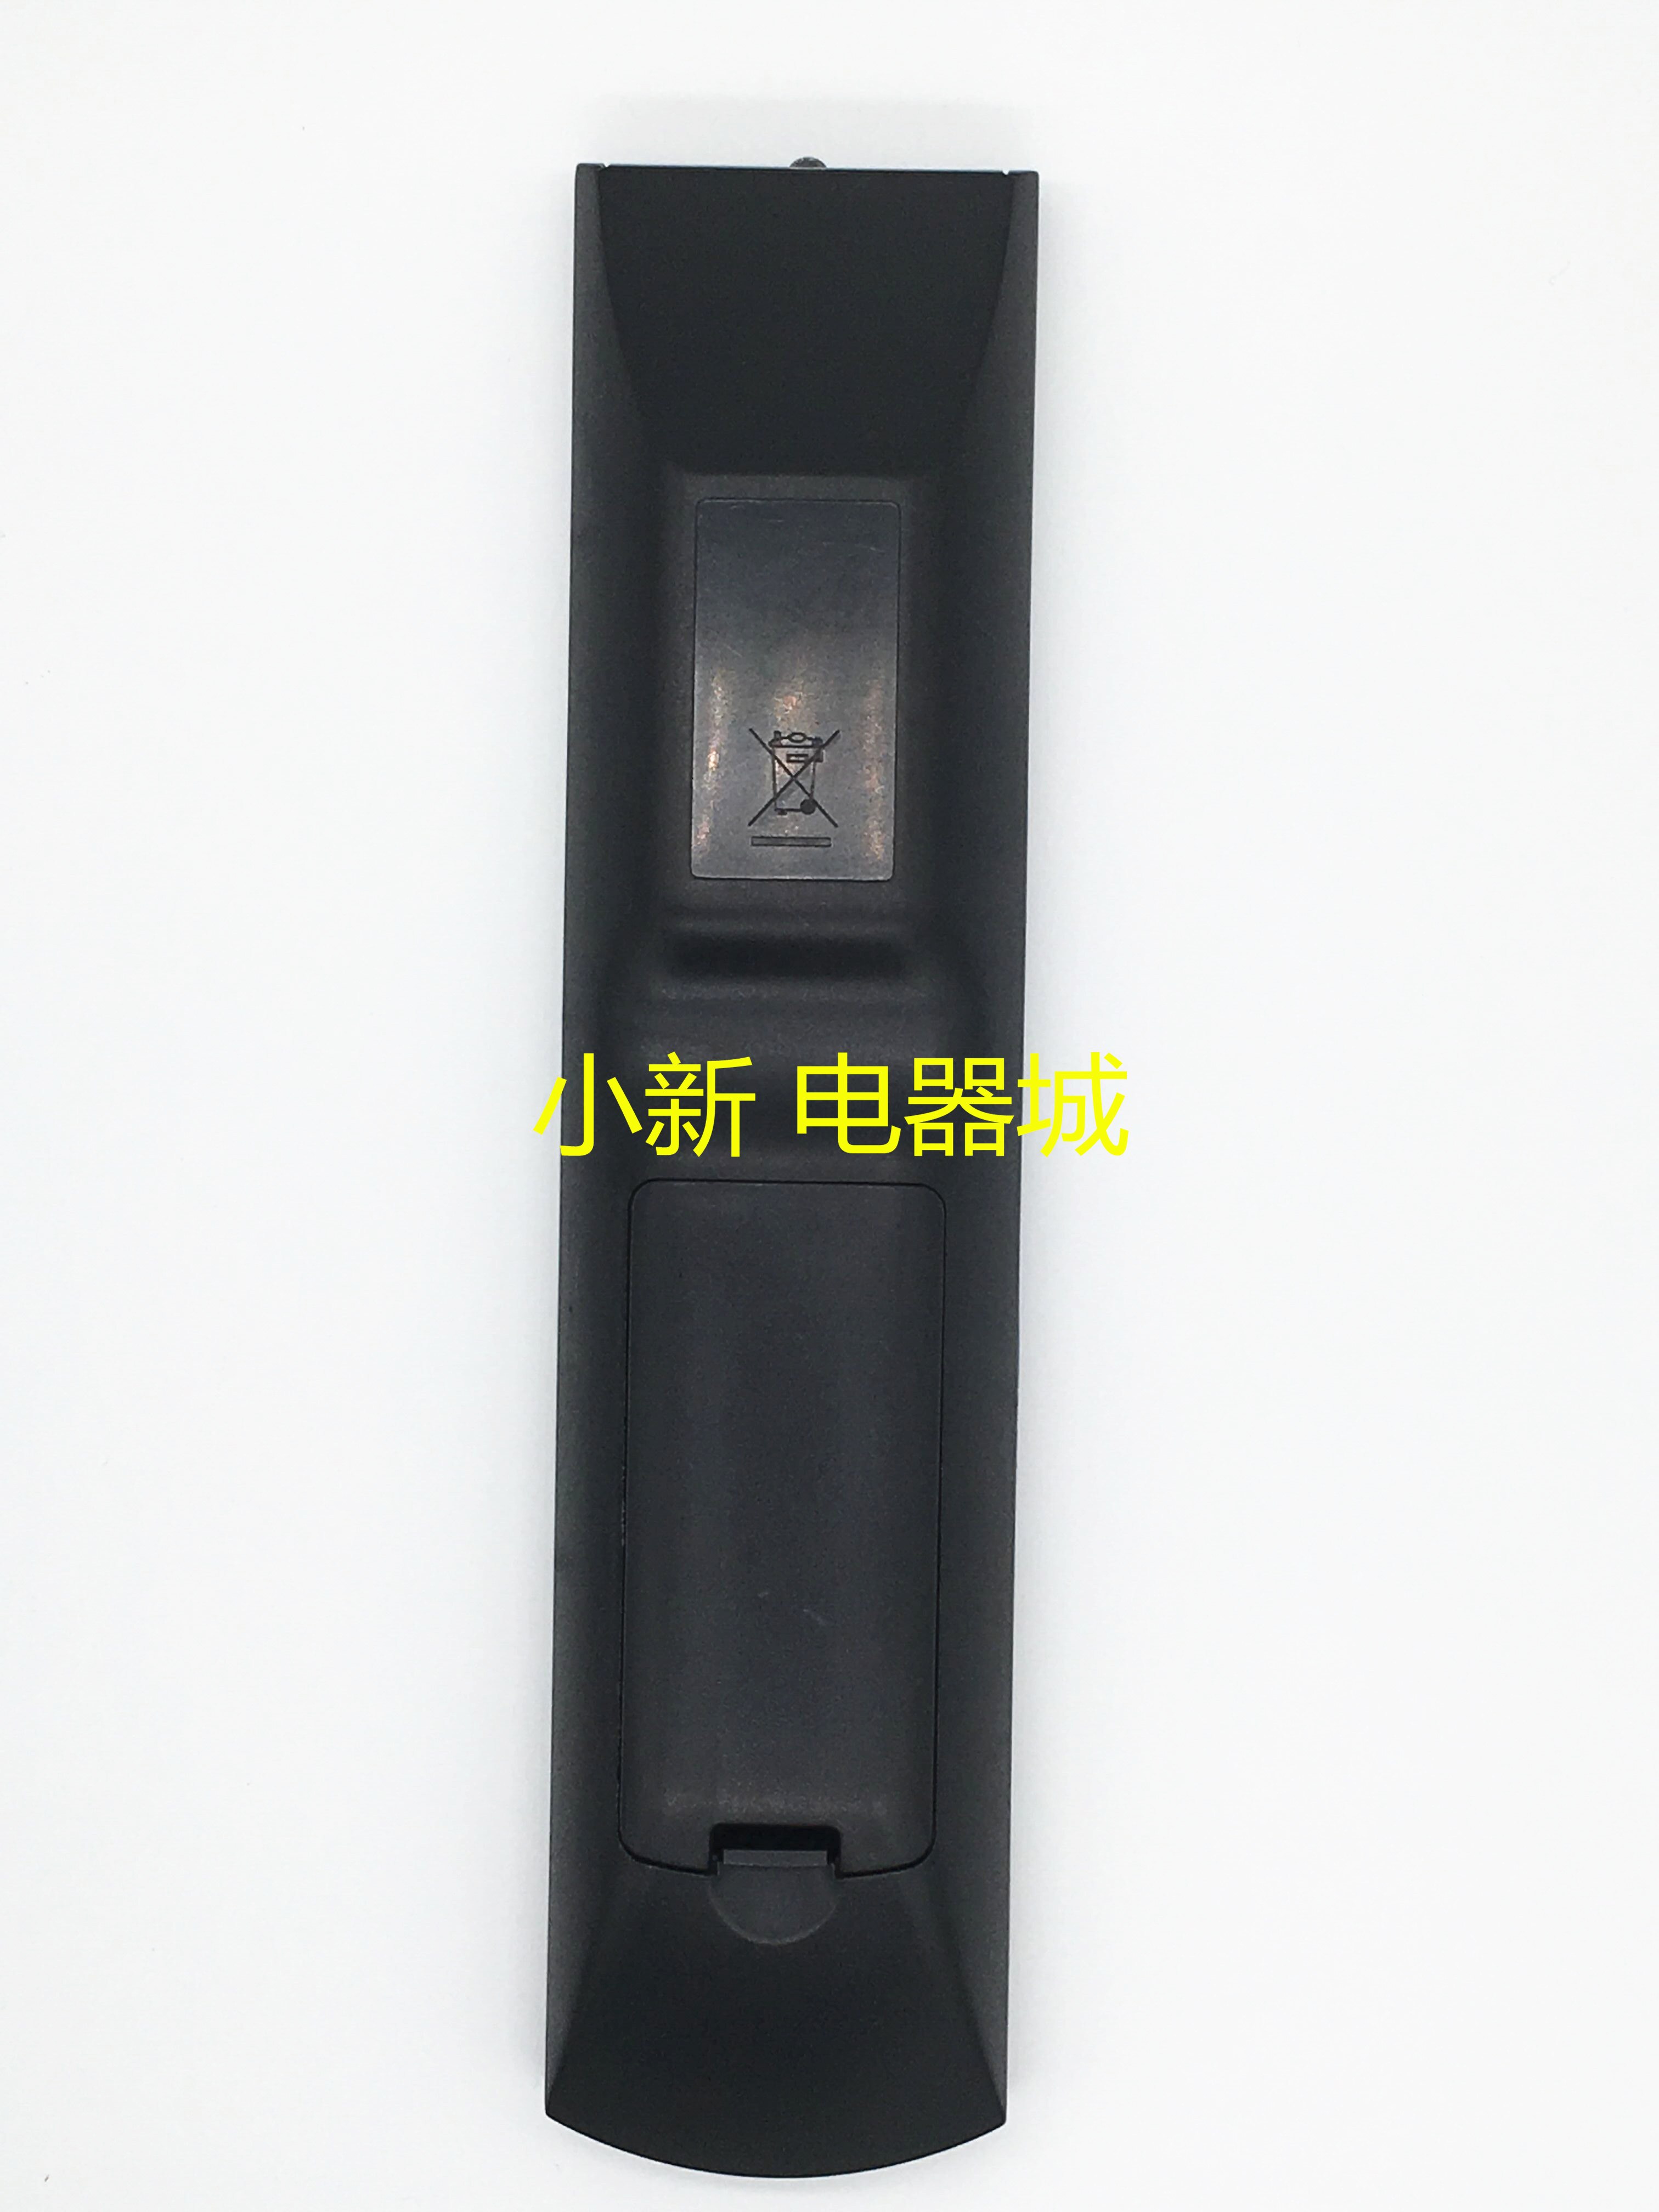 Original Suitable for Sony power amplifier remote control RM-AAU019 HT-SF2000 HT-SS2000 STR-KS2000 SS-MSP120